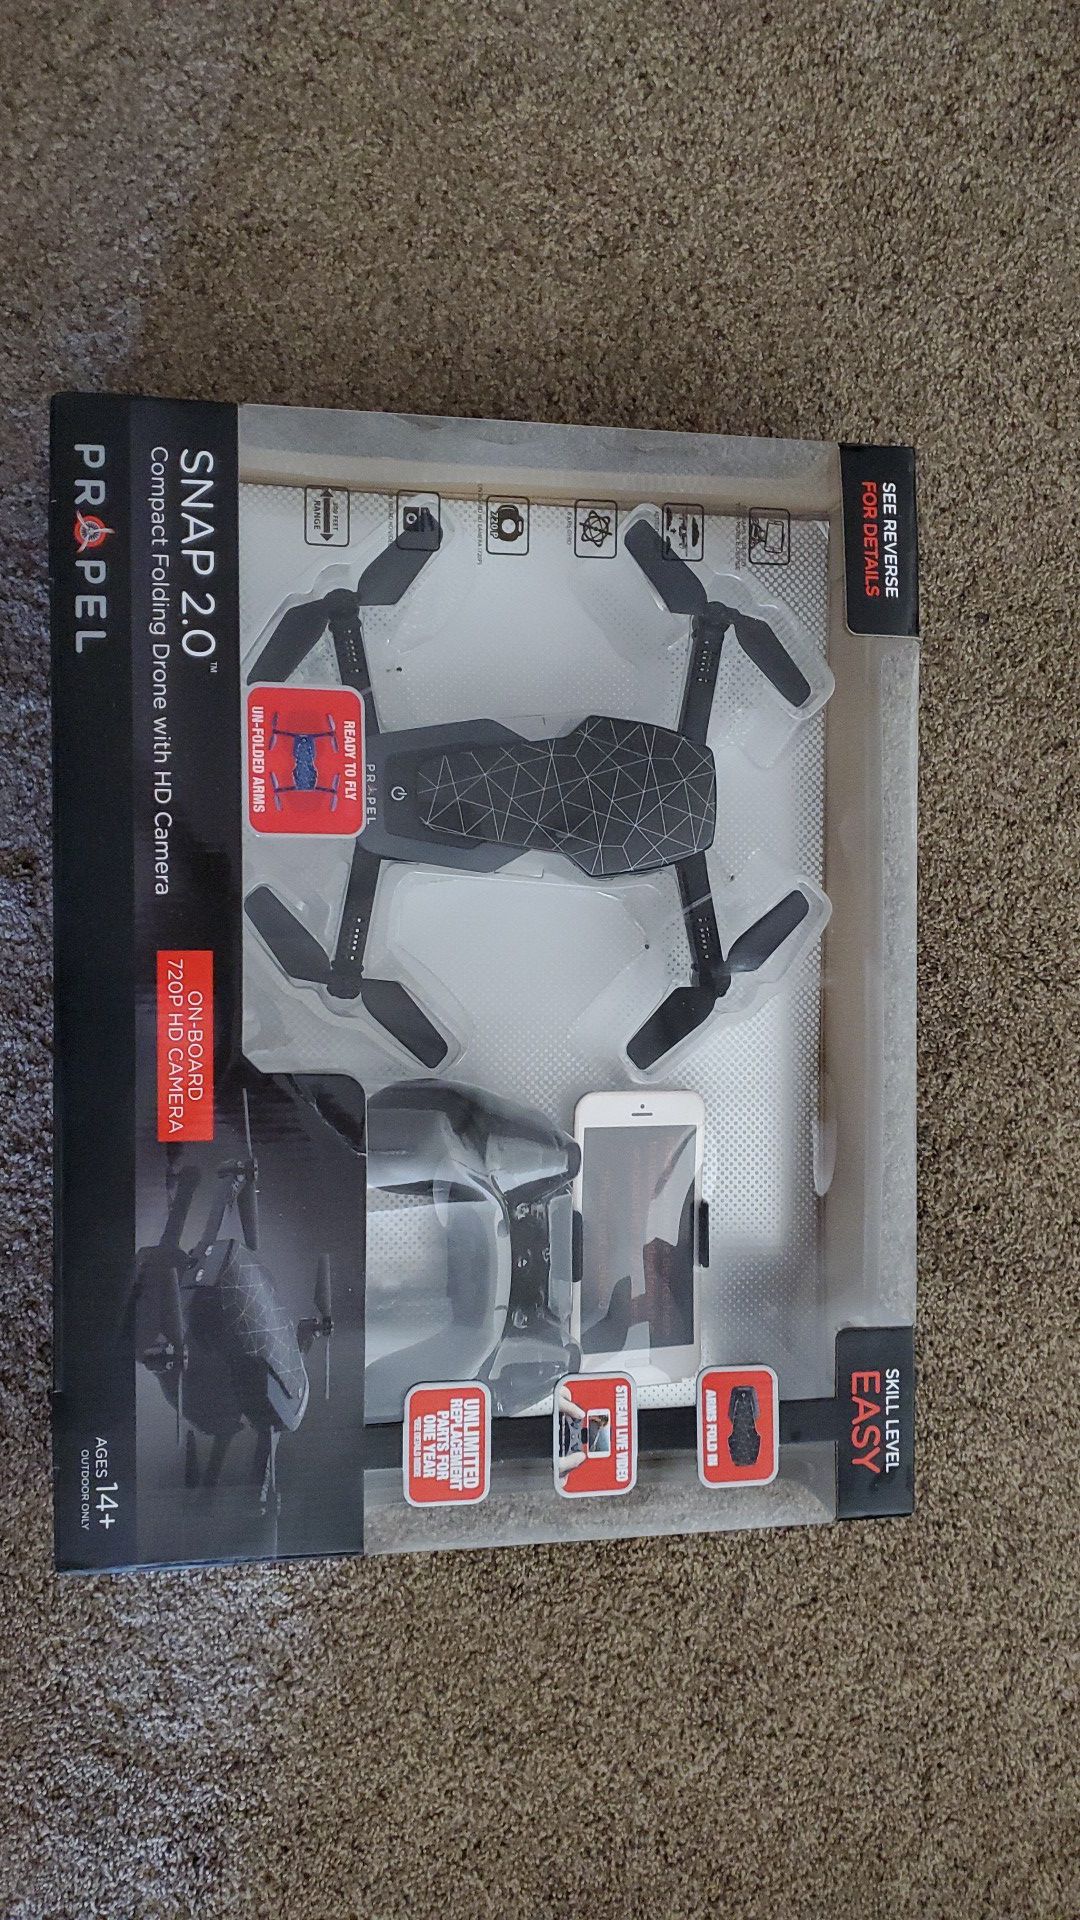 Snap 2.0 drone